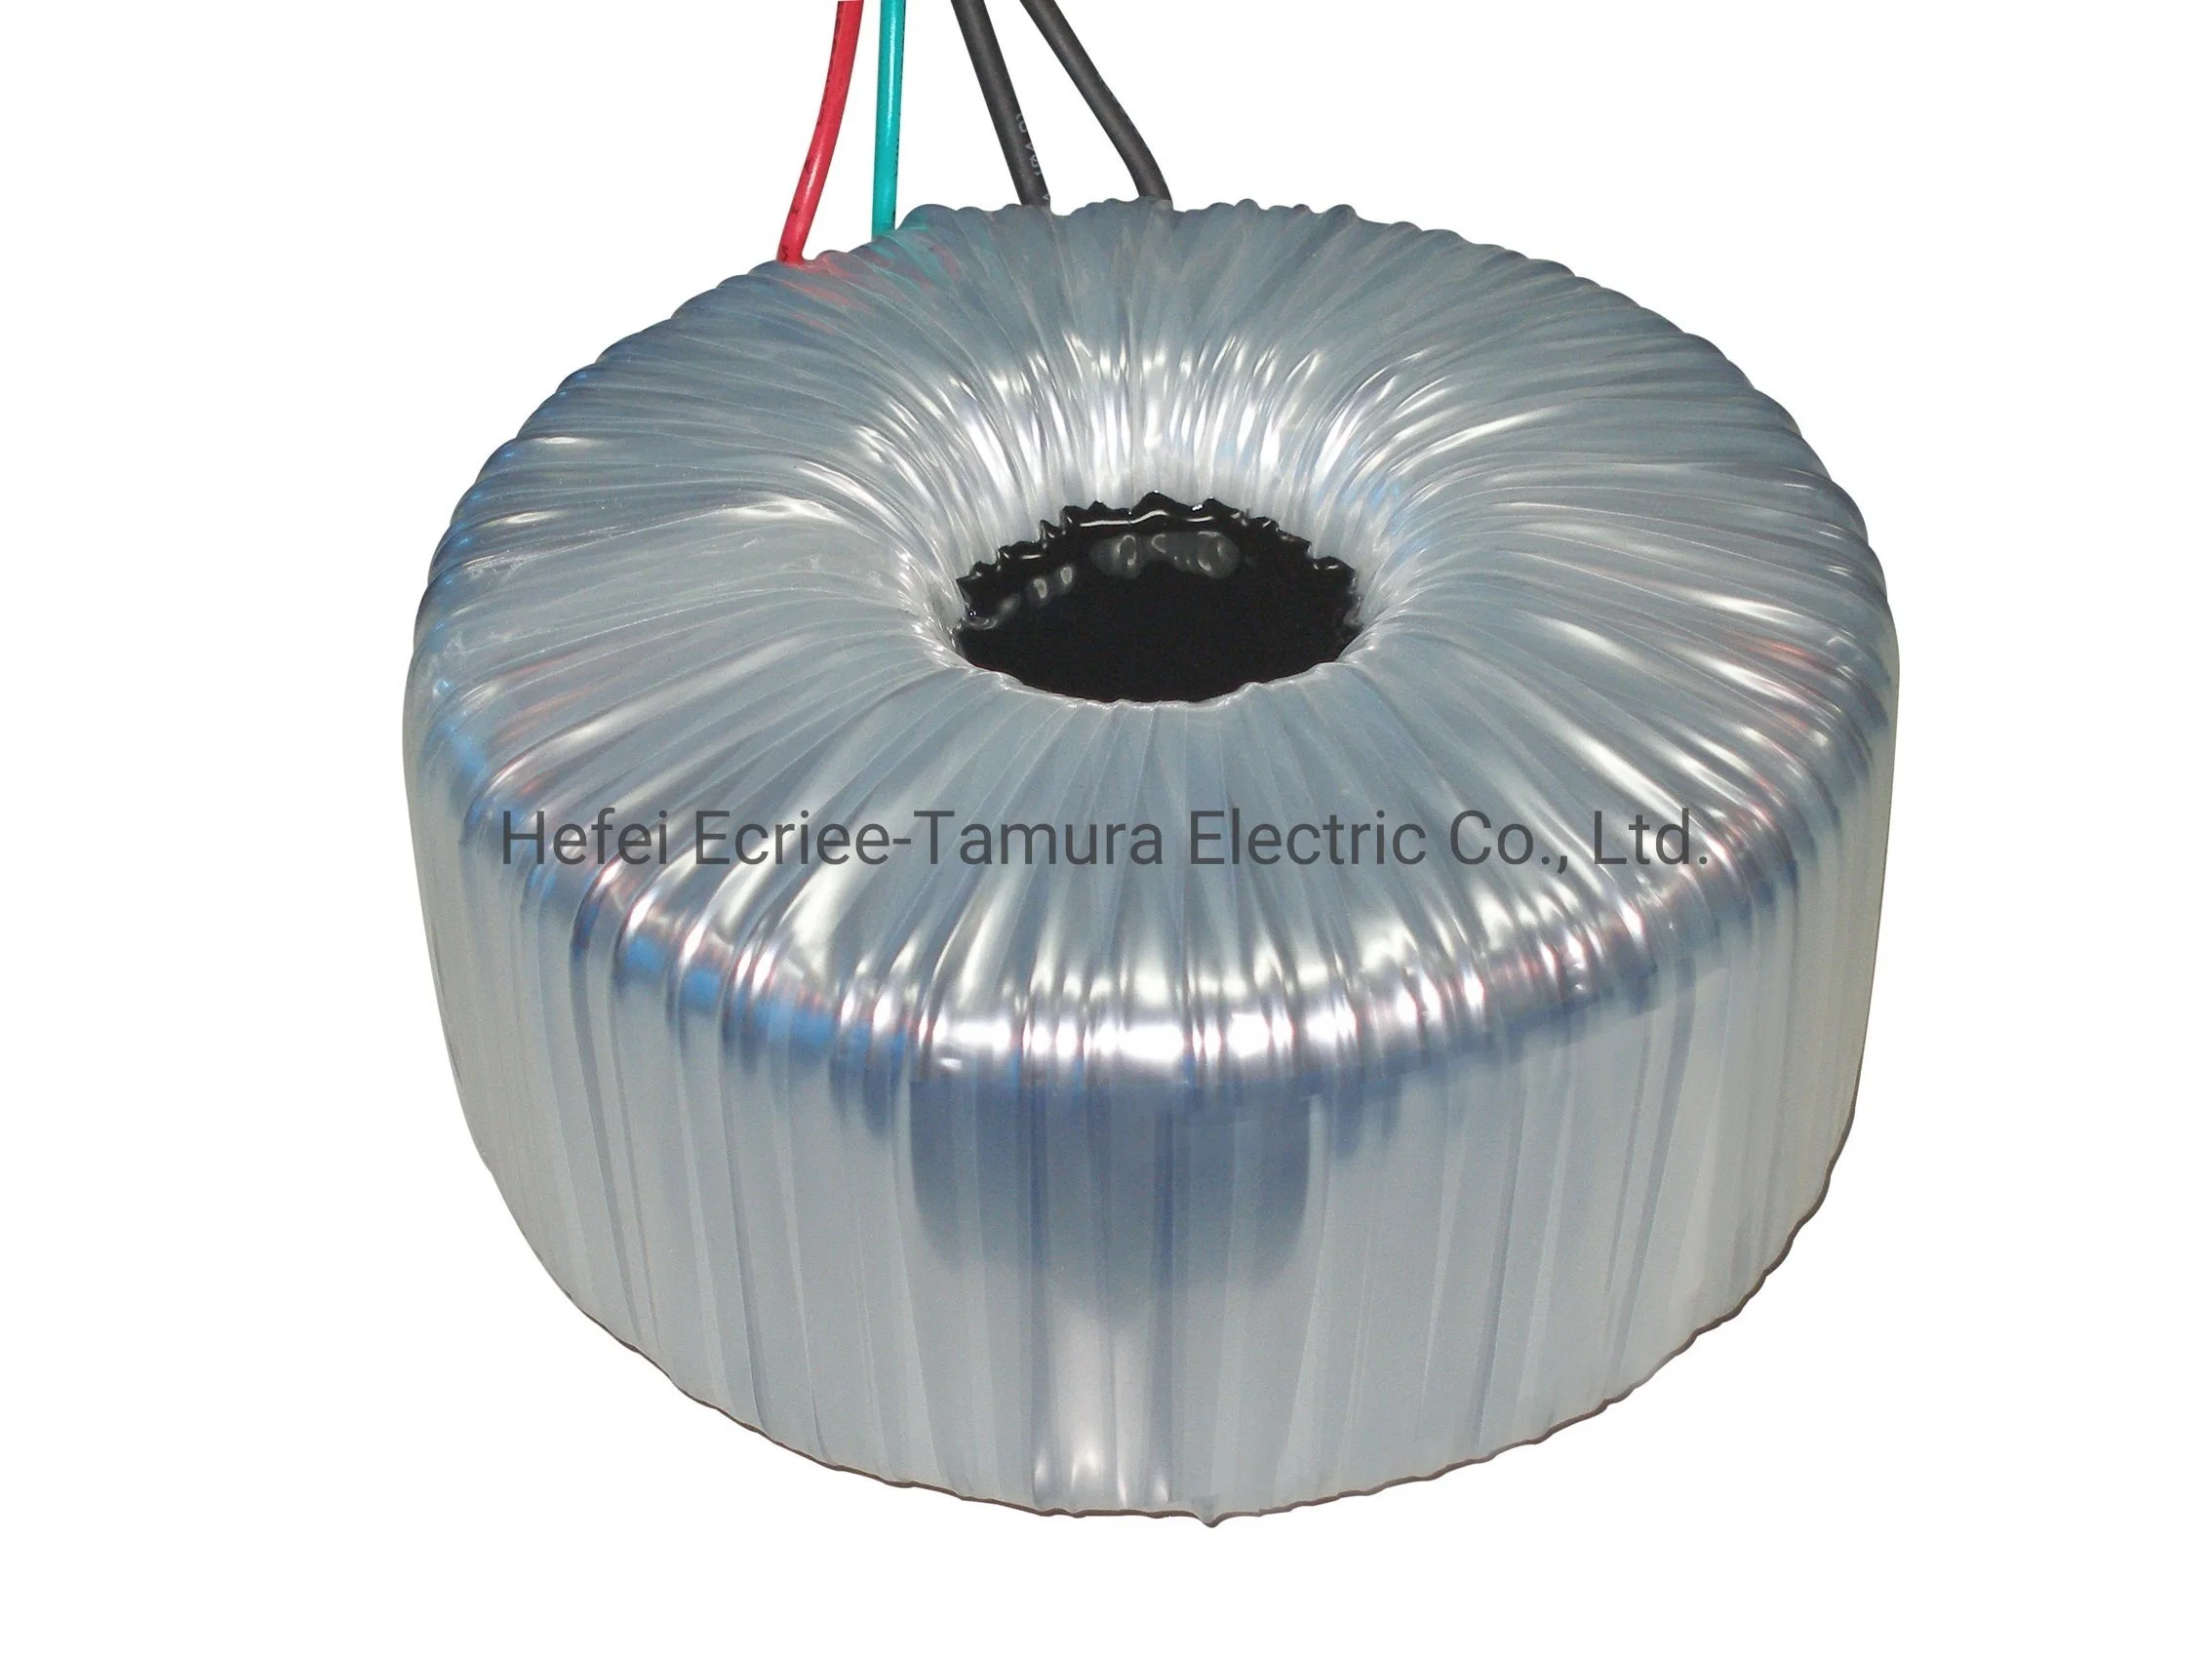 Ecriee-Tamura Toroidal Transformer with High Cost Performance and High Reliability